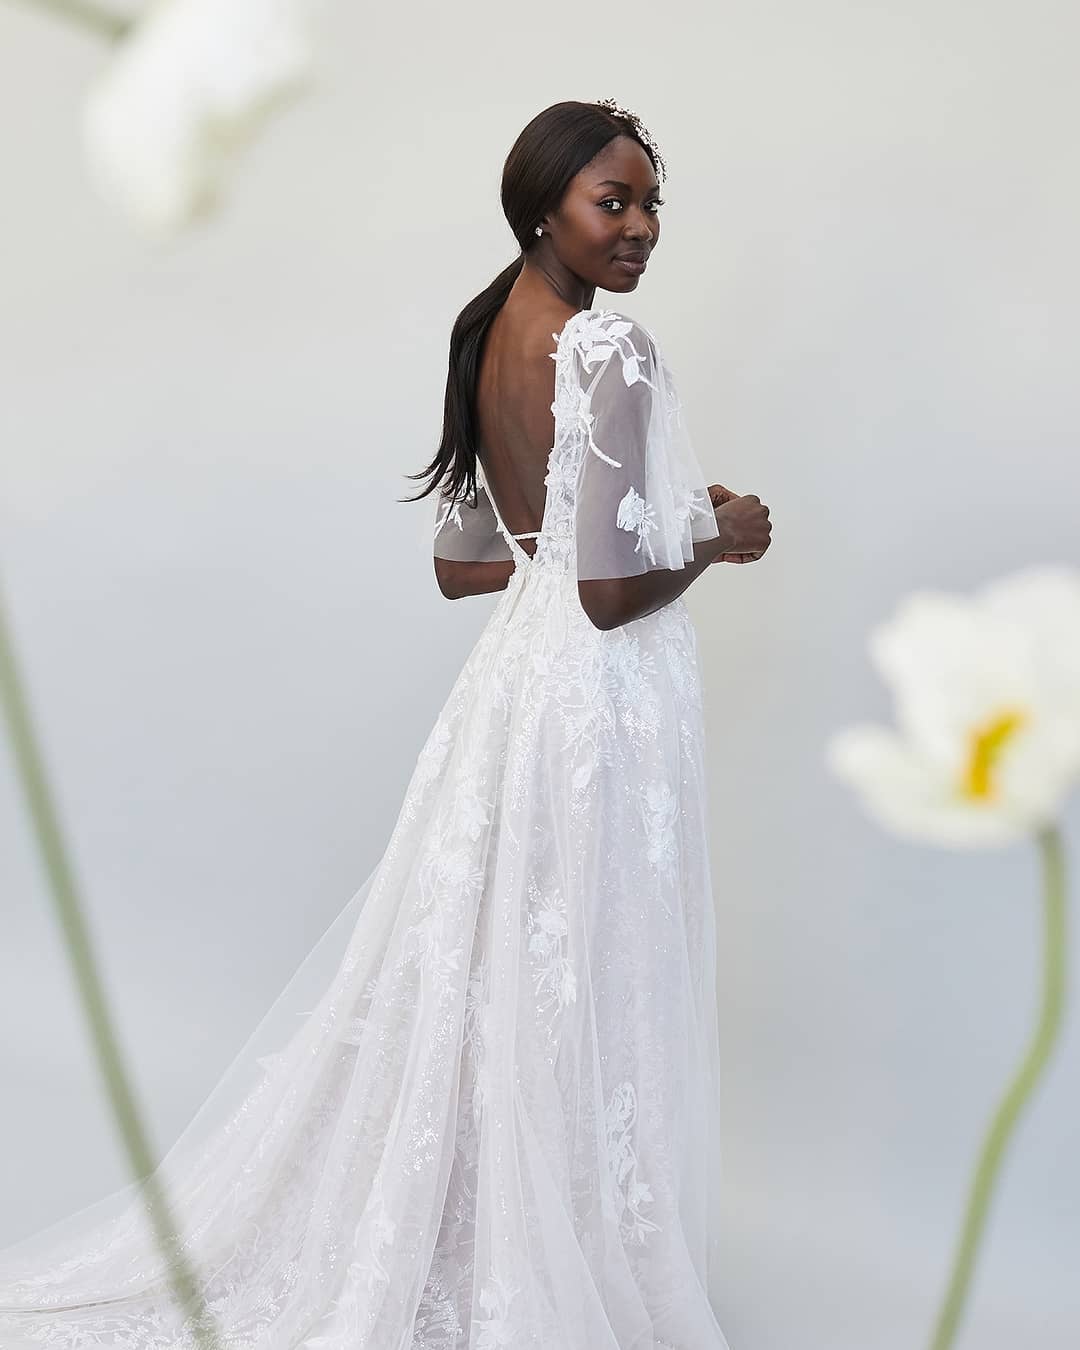 BEST LACE WEDDING DRESSES FOR AFRICAN WOMEN-FASHION 15